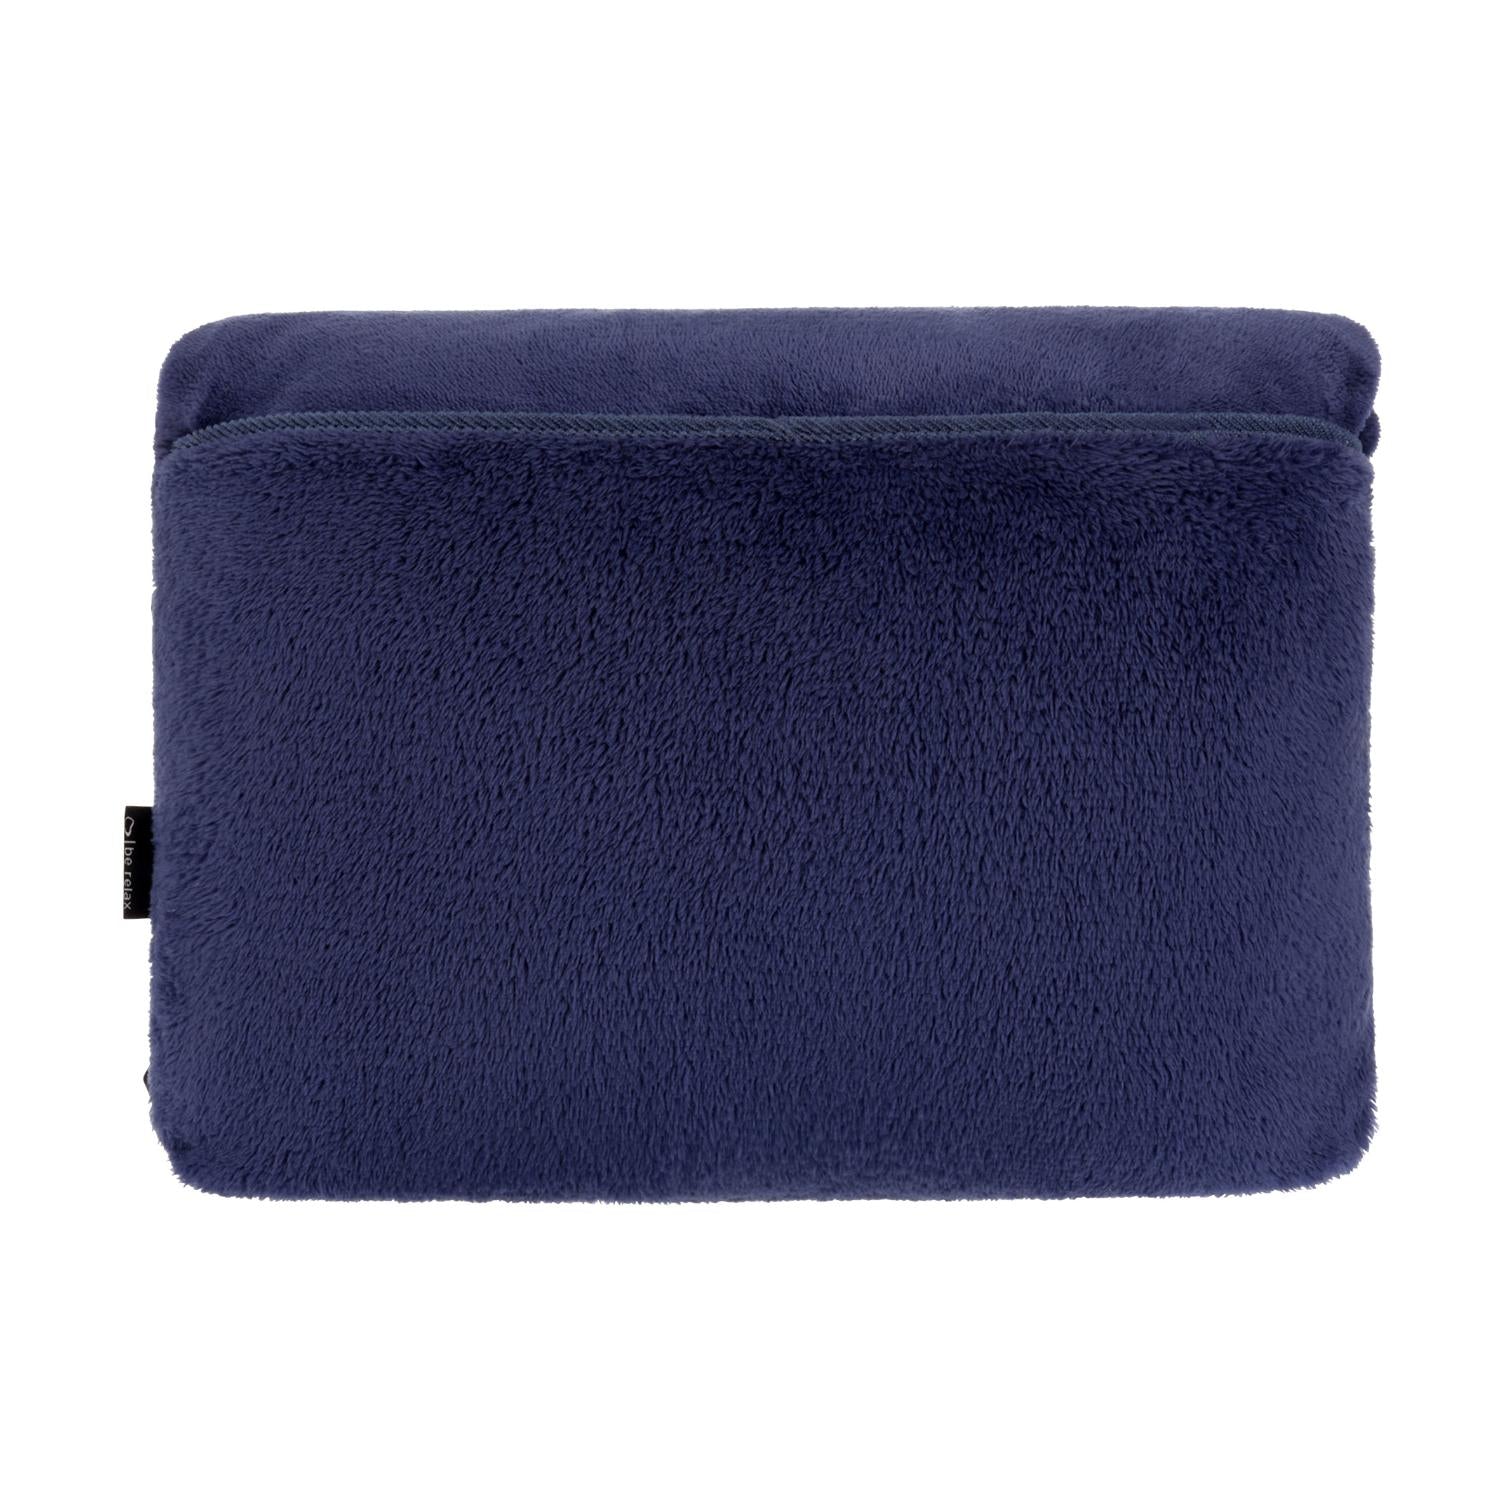 Be Relax My Comfy Travel Blanket - Navy